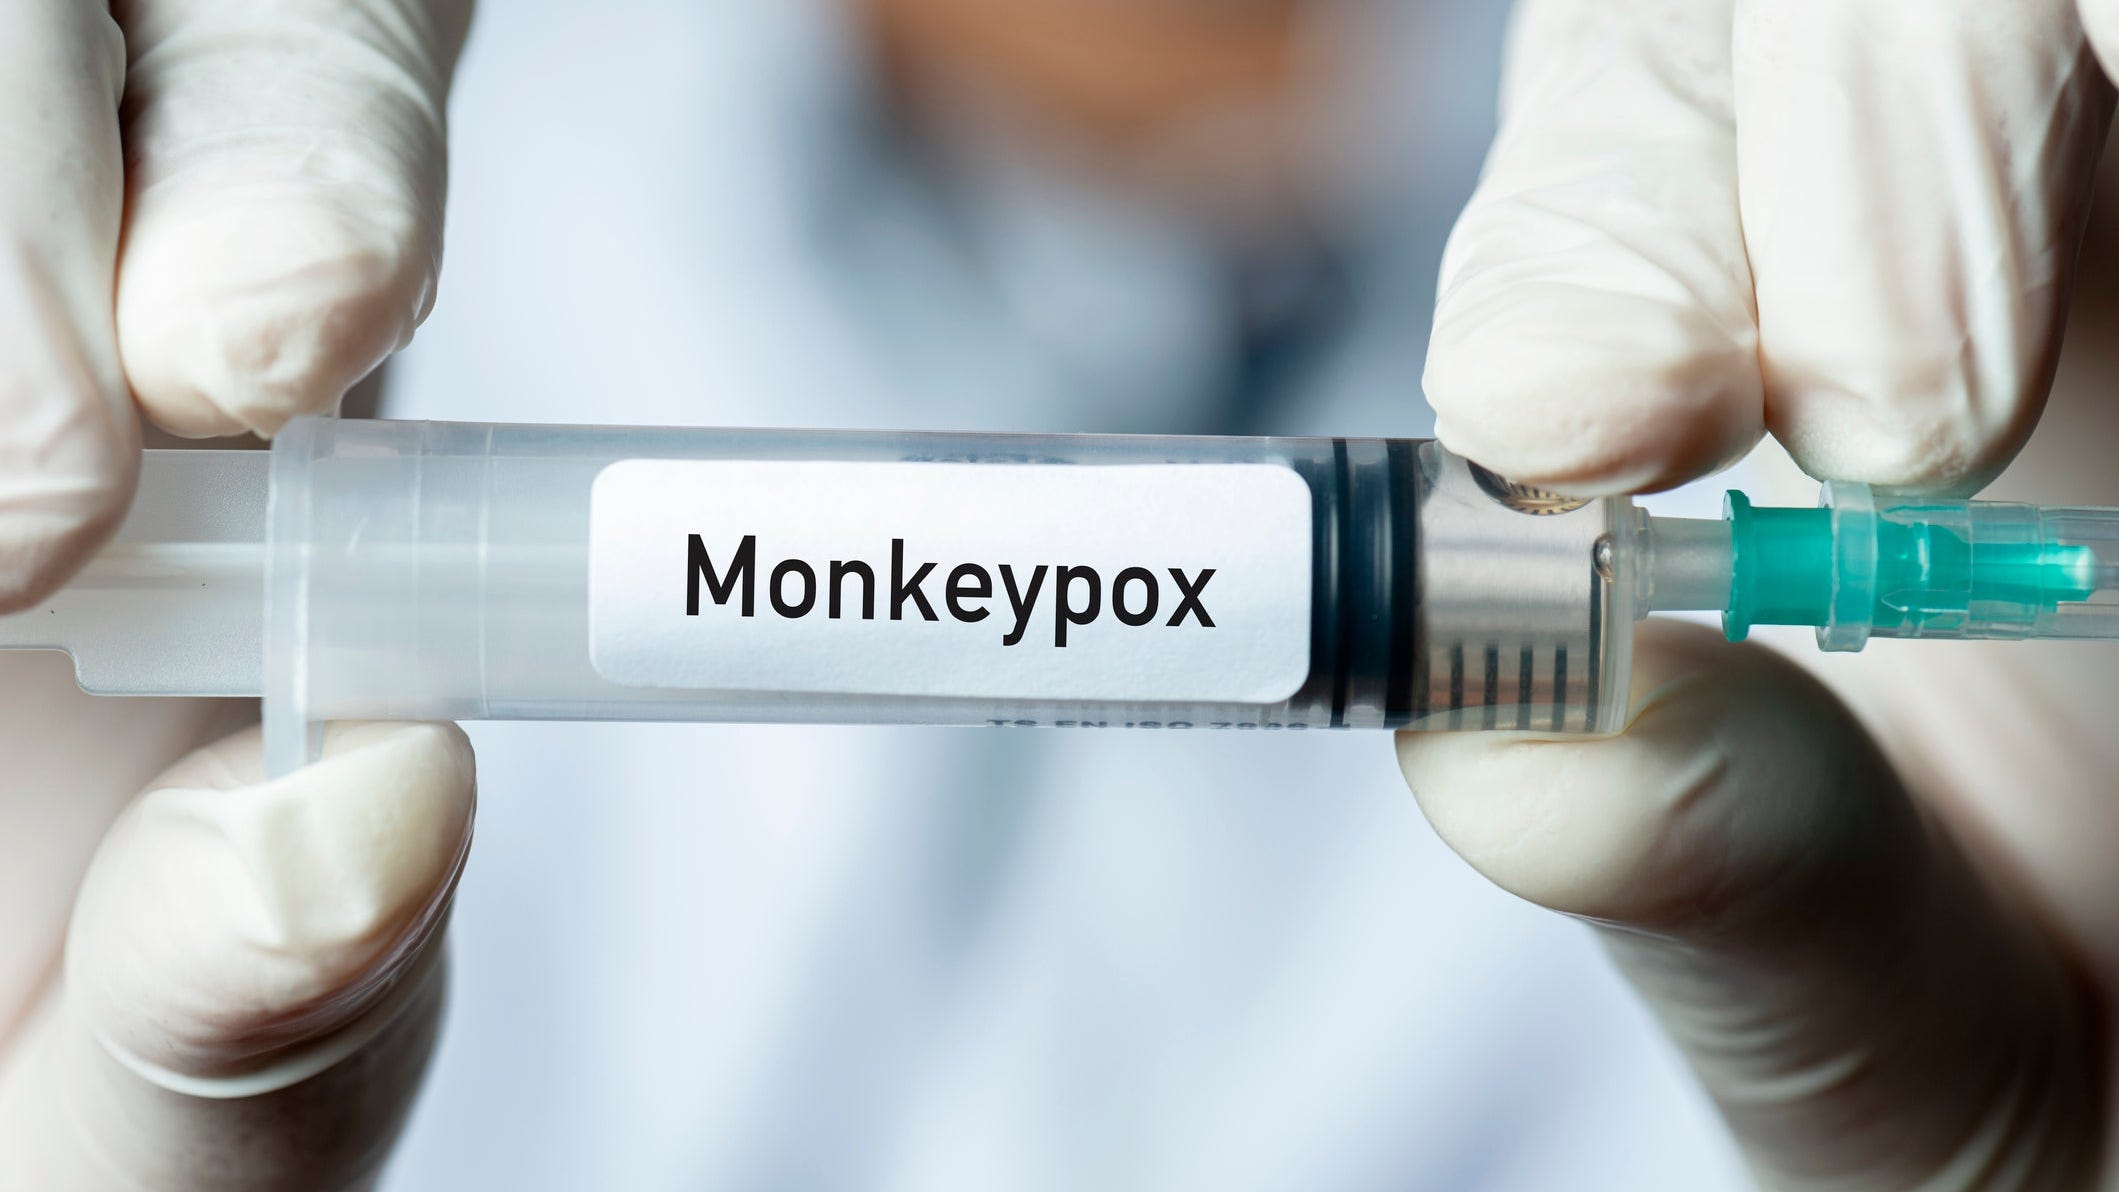 First monkeypox case recorded in Collier County on Friday